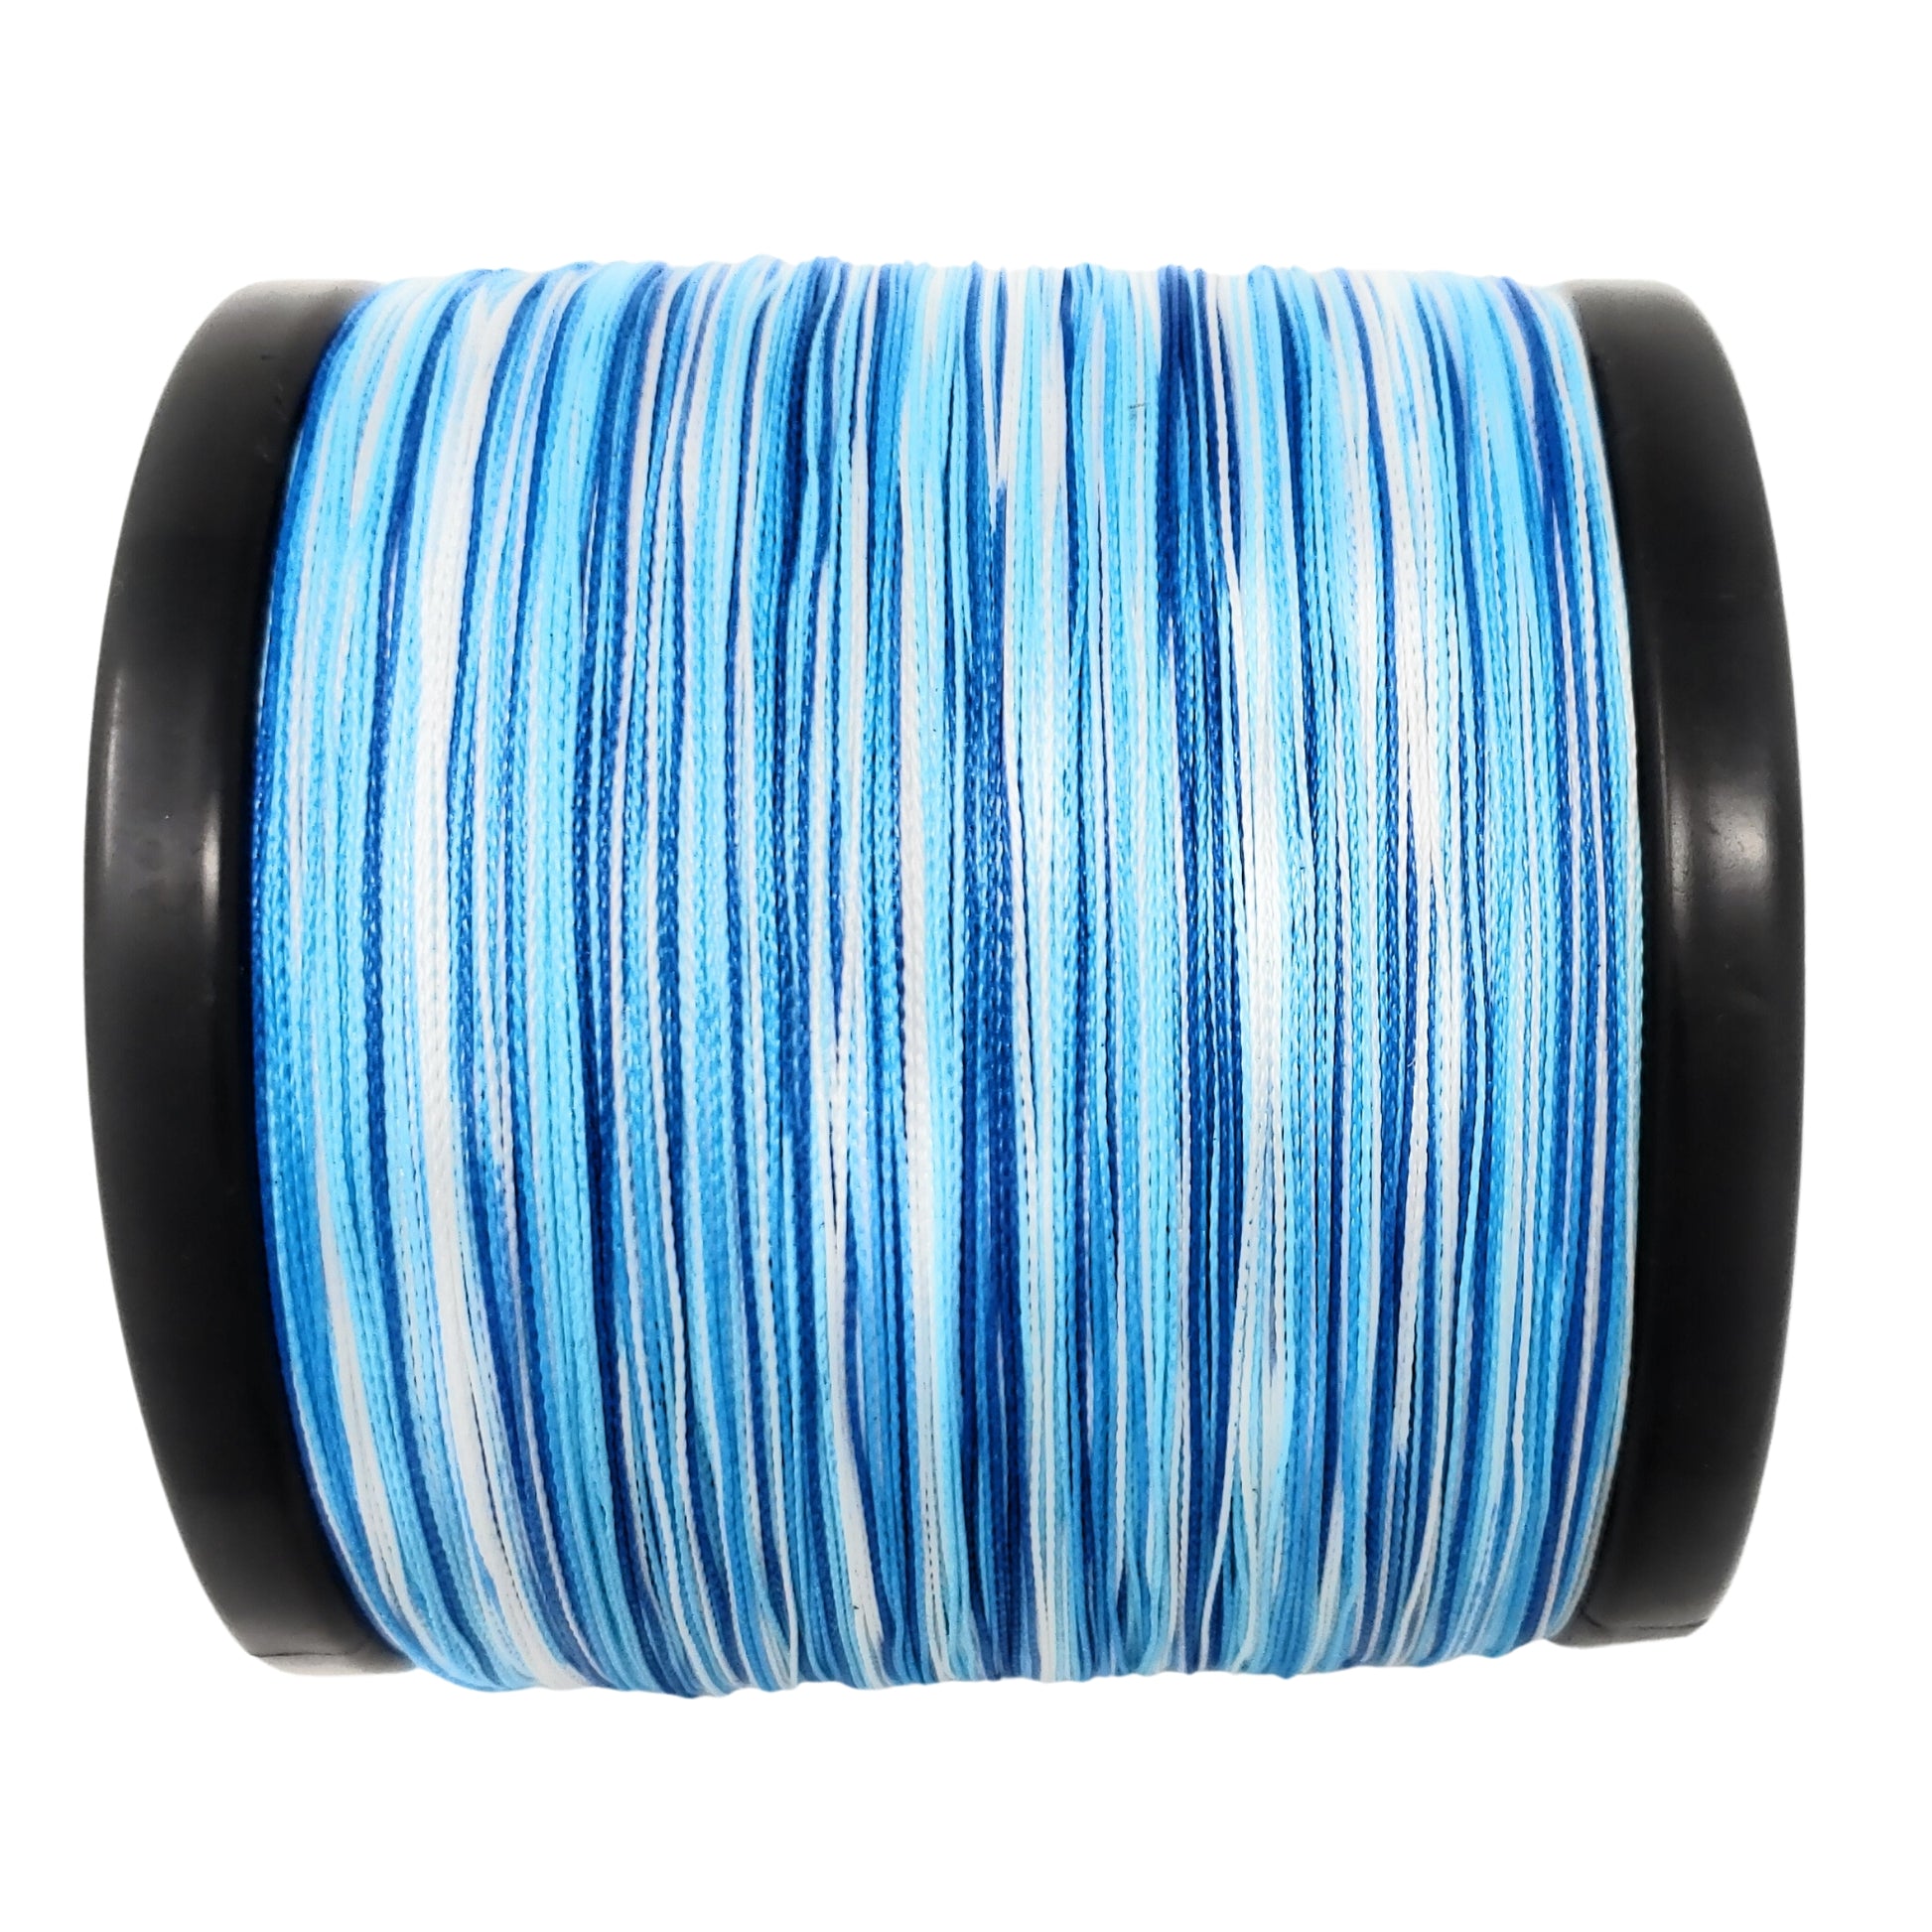 GetUSCart- Reaction Tackle Braided Fishing Line Blue Camo 50LB 500yd